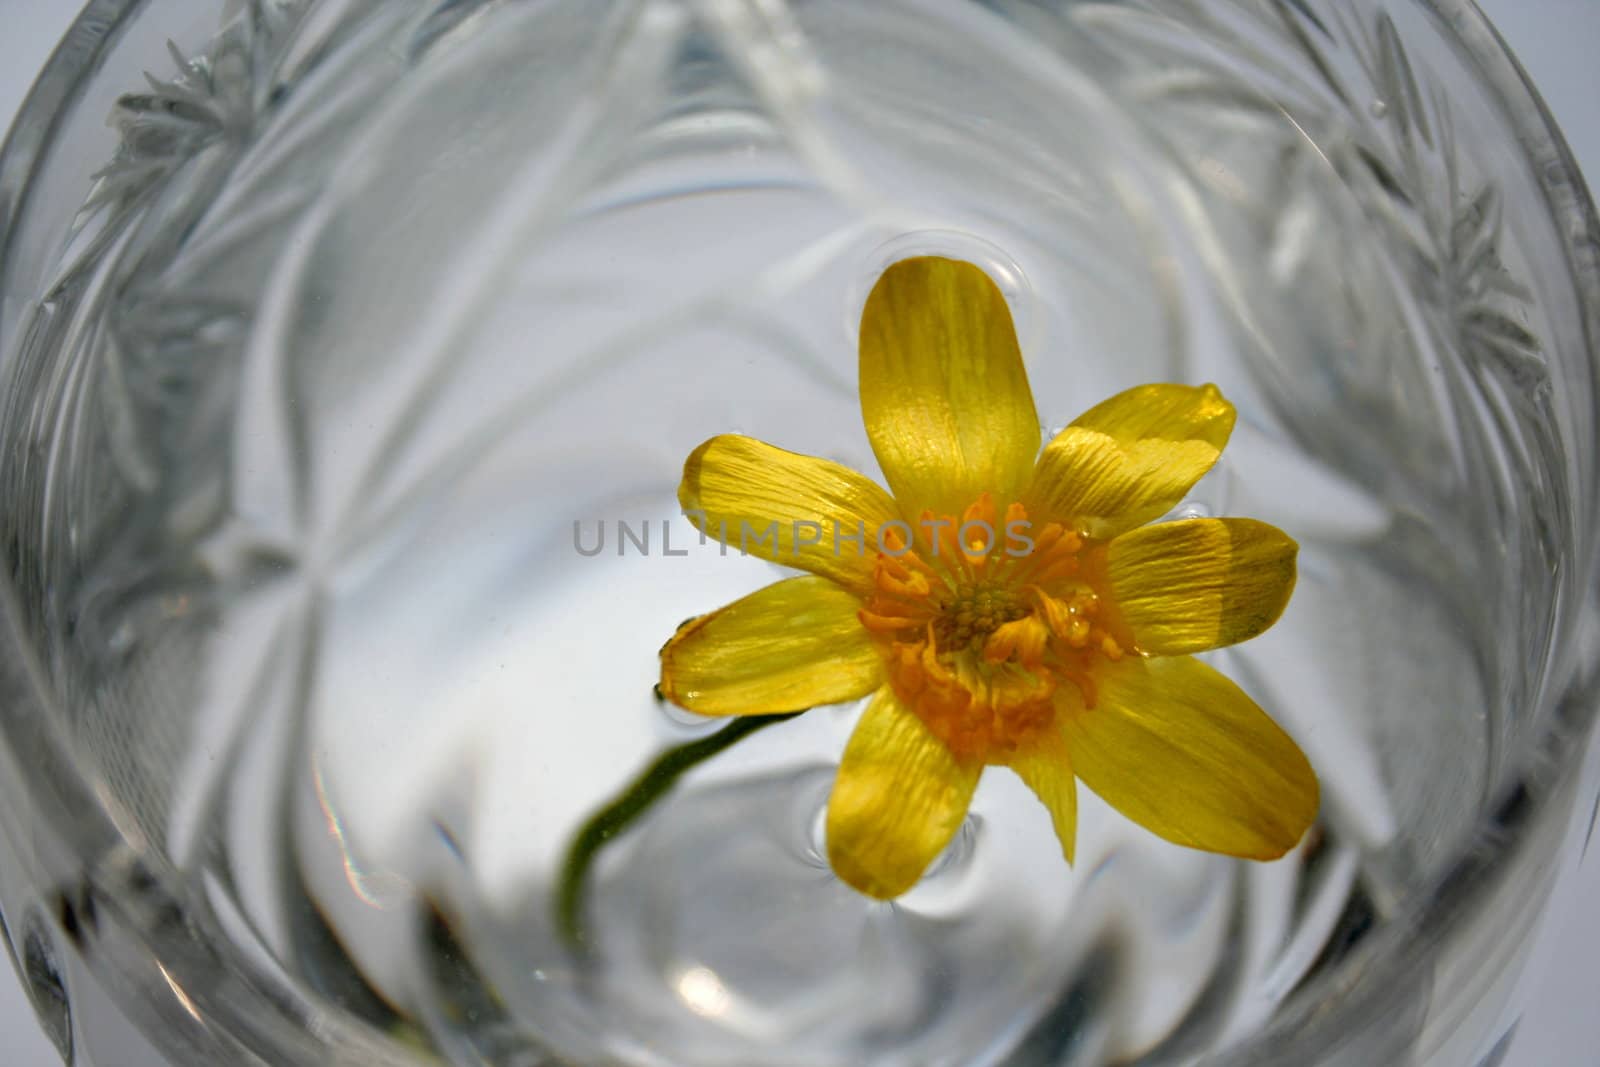 A flower floats in the crystal glass.